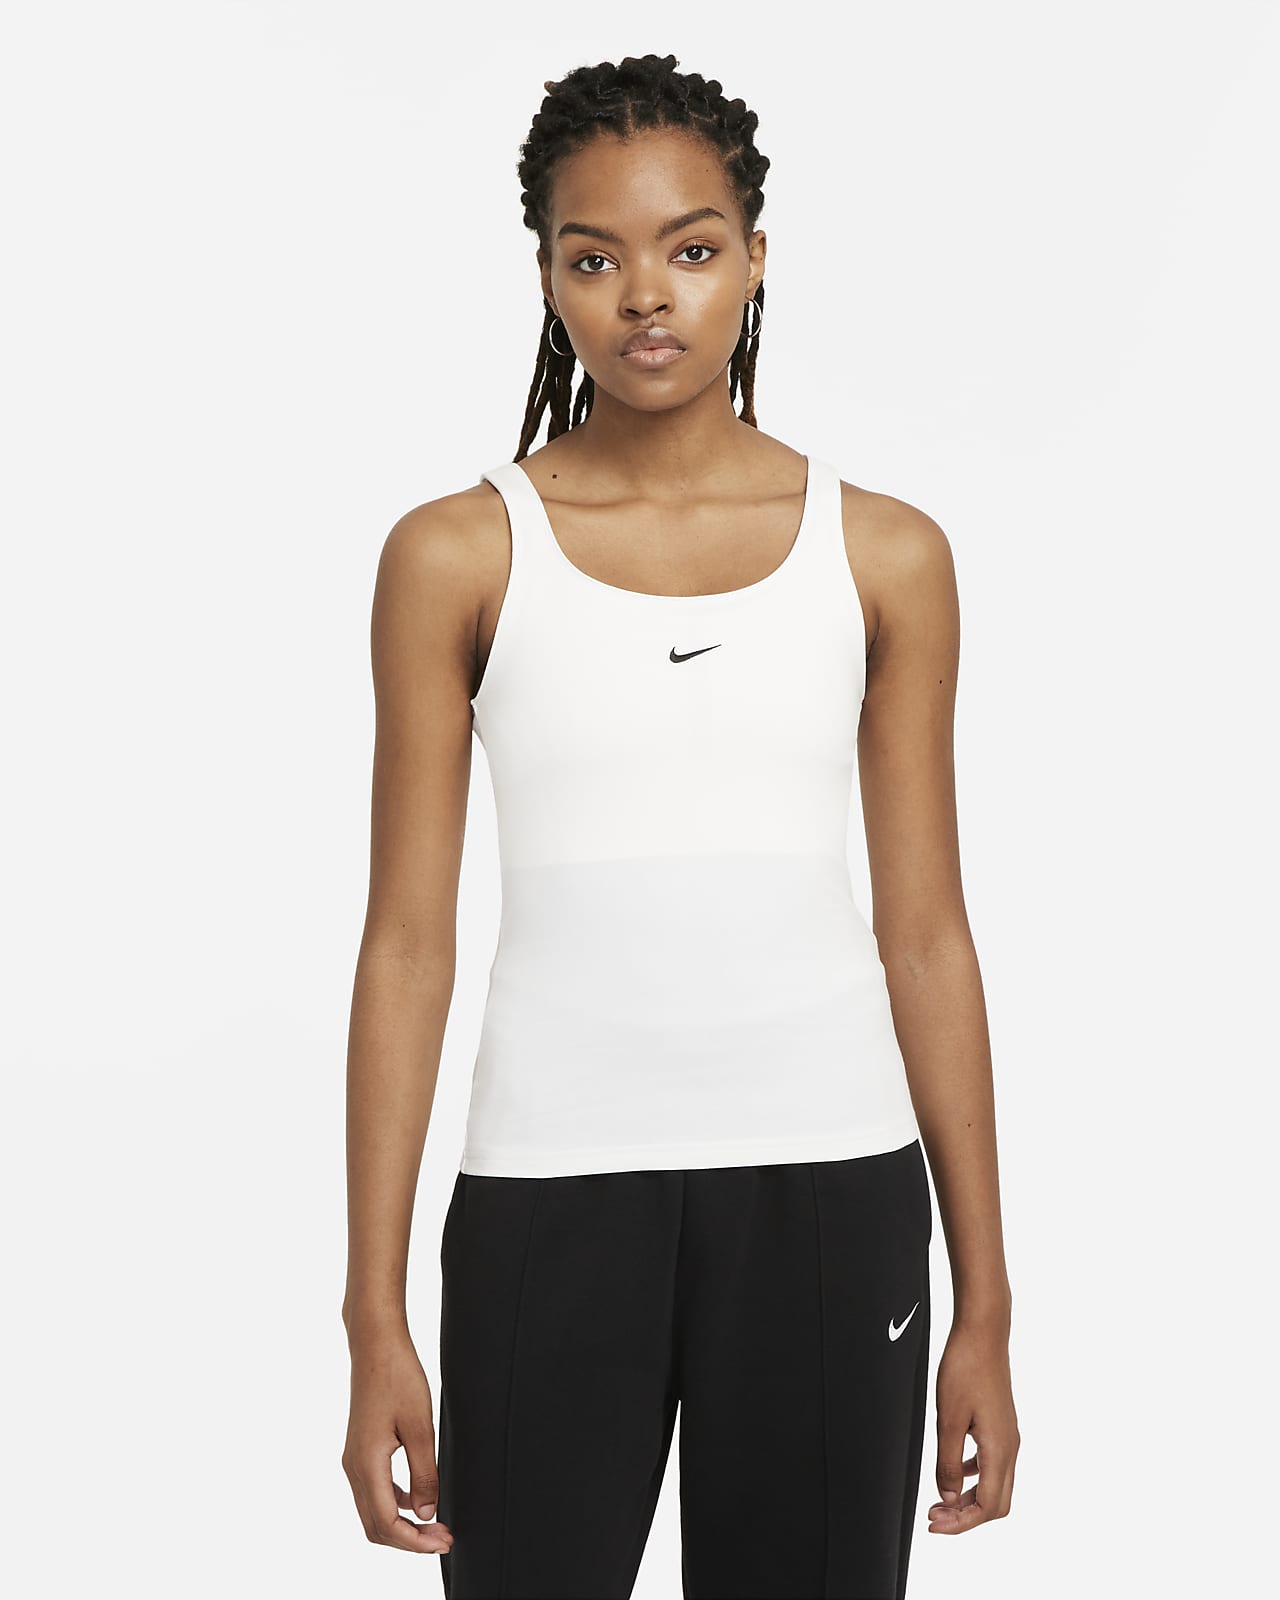 https://static.nike.com/a/images/t_PDP_1280_v1/f_auto,q_auto:eco/cc903f44-6f4c-4a10-b2ff-d51d265829cd/sportswear-essential-cami-tank-0FWVp9.png